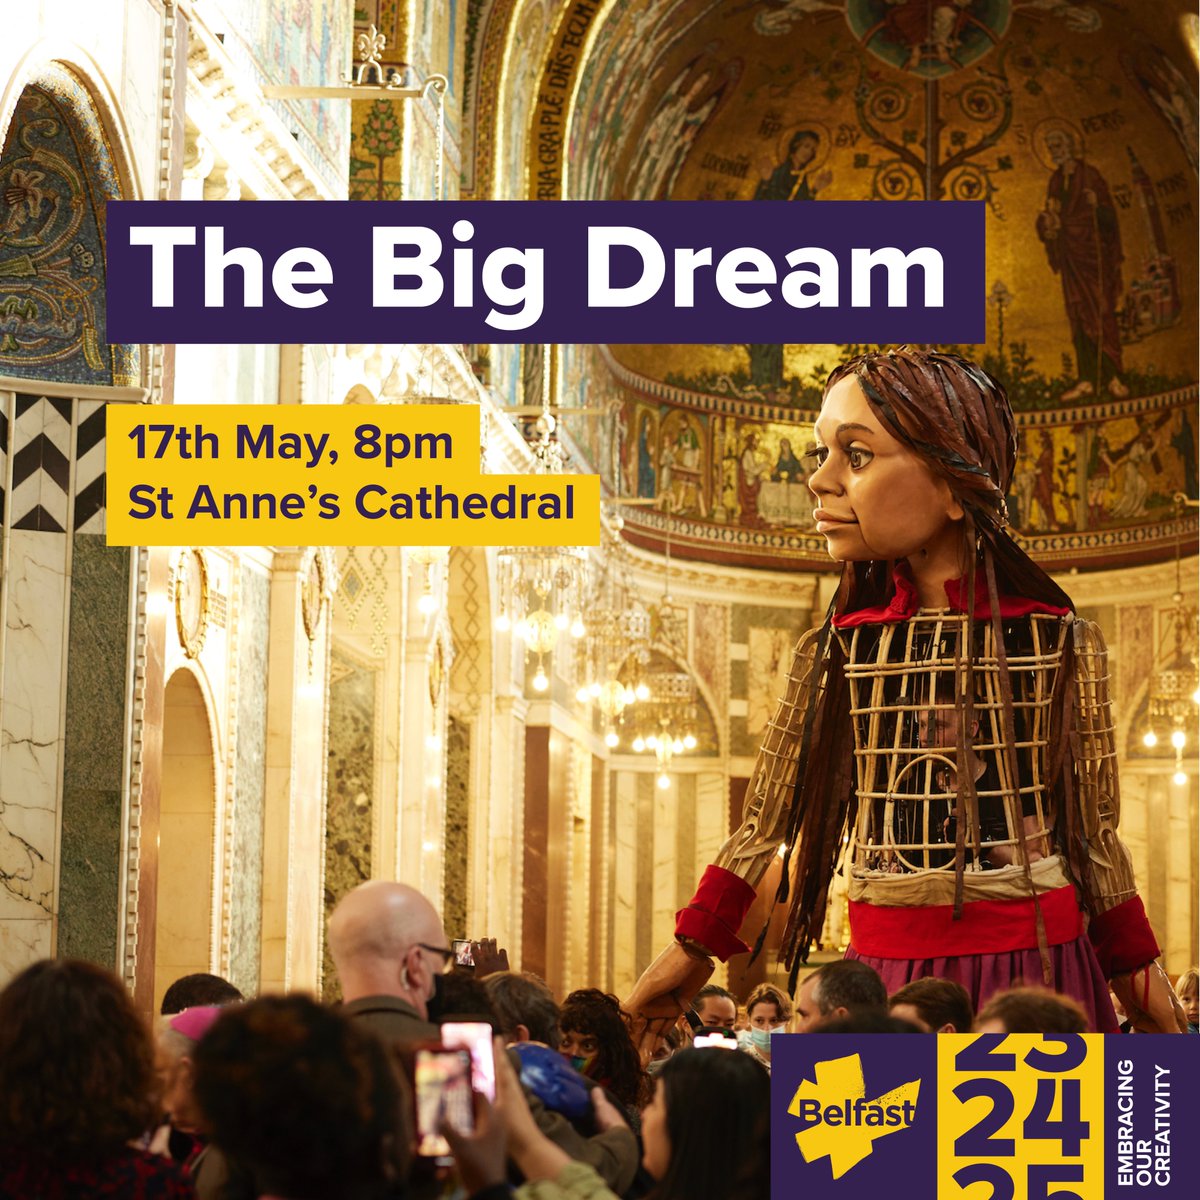 The Big Dream 🌚 A dreamy night of music and celestial celebration featuring some of Northern Ireland’s most exciting musical talent: Beauty Sleep, Winnie Ama, Hex hue, Huartan, Laytha, Garrett Laurie, The Sanctuary Choir and more to be announced. As the sun makes way for the